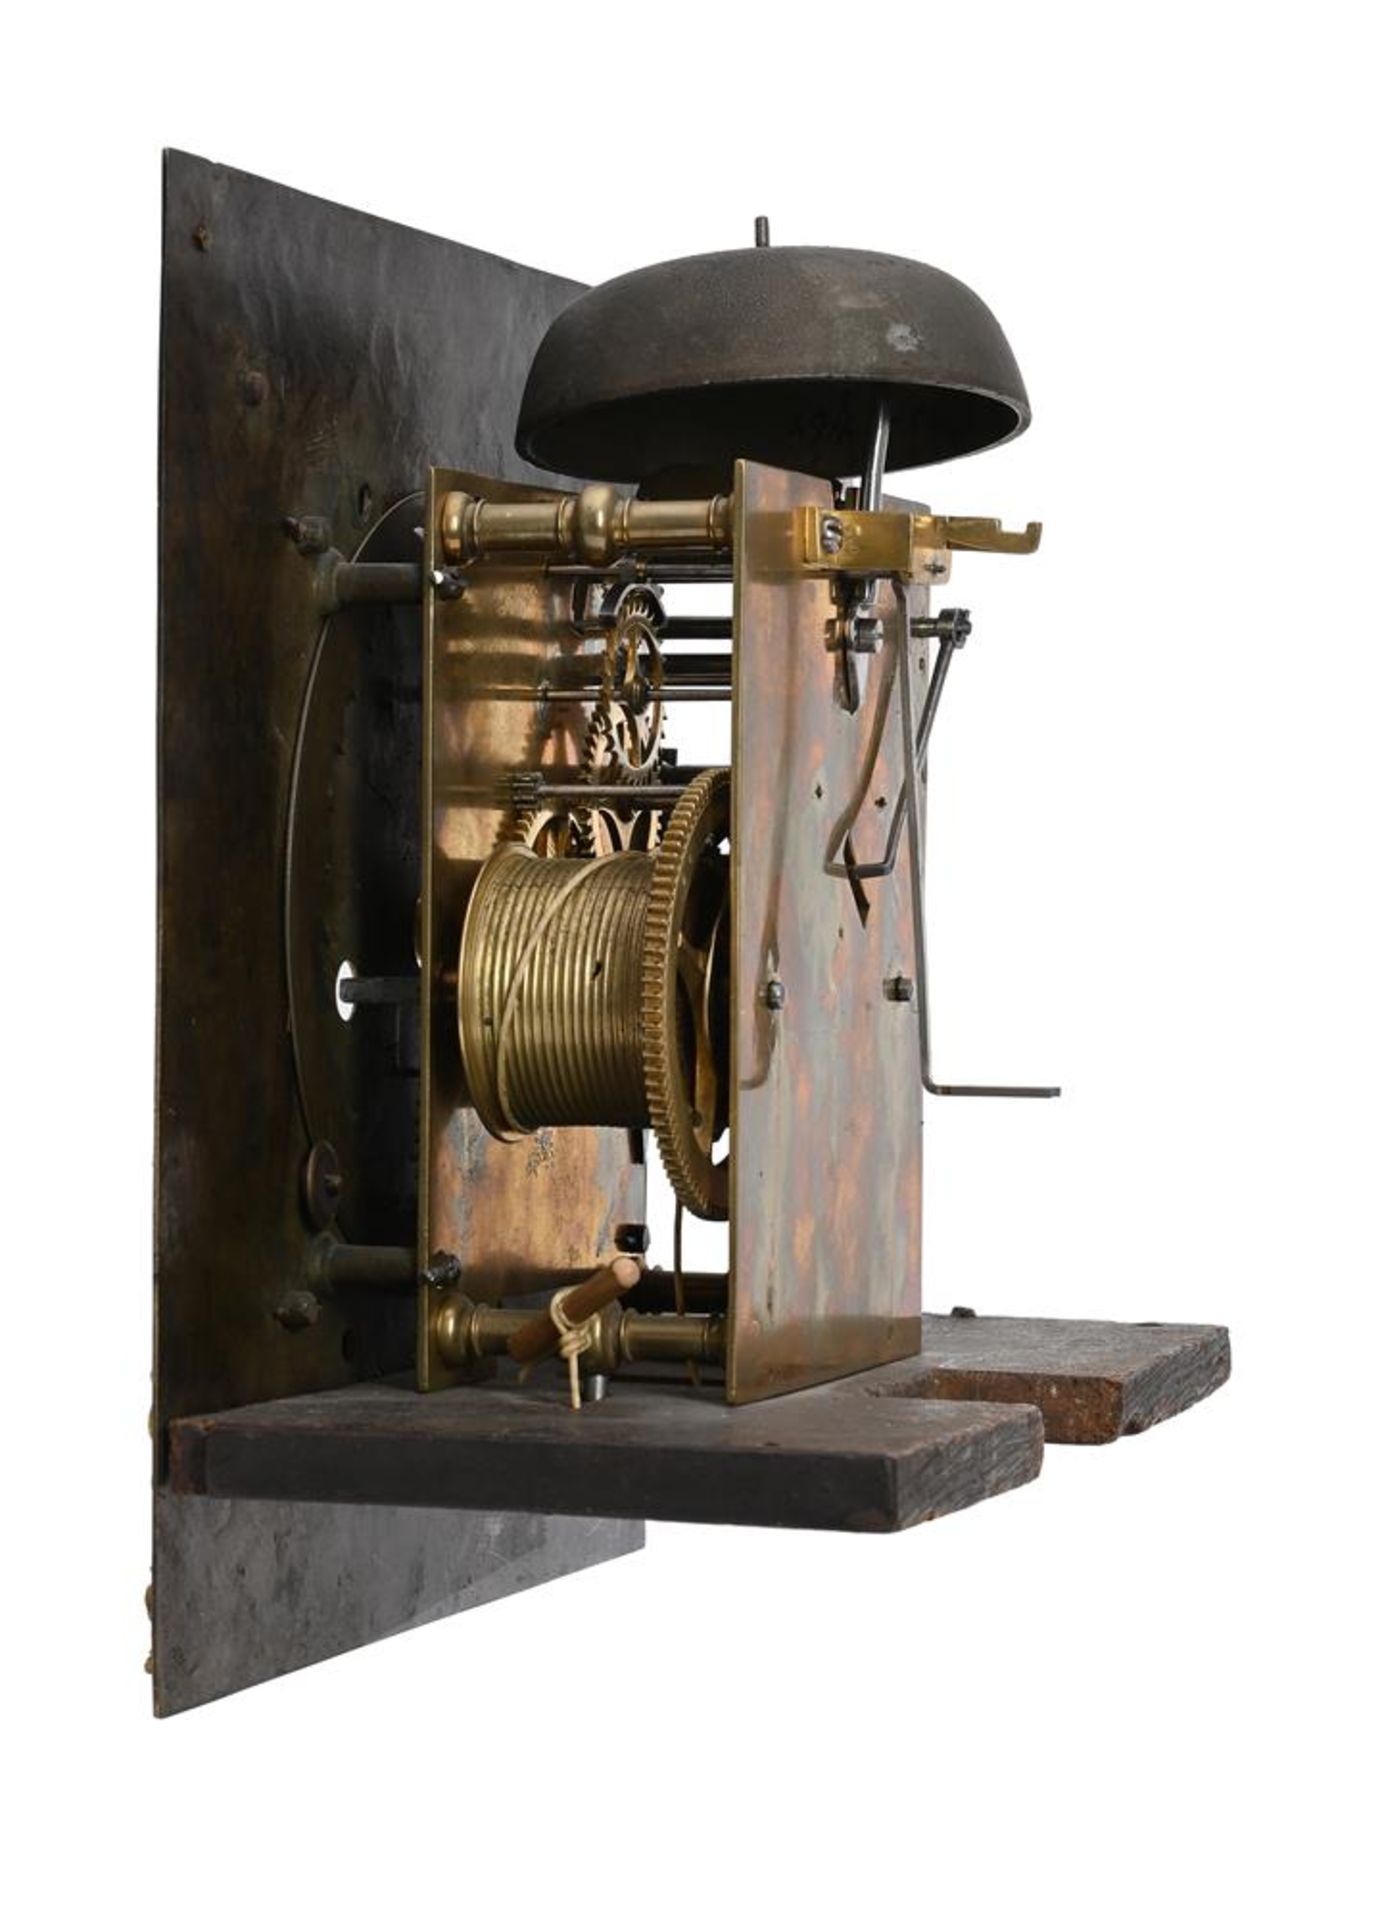 A WALNUT EIGHT-DAY LONGCASE CLOCK WITH AN ELEVEN-INCH DIAL - Image 4 of 4